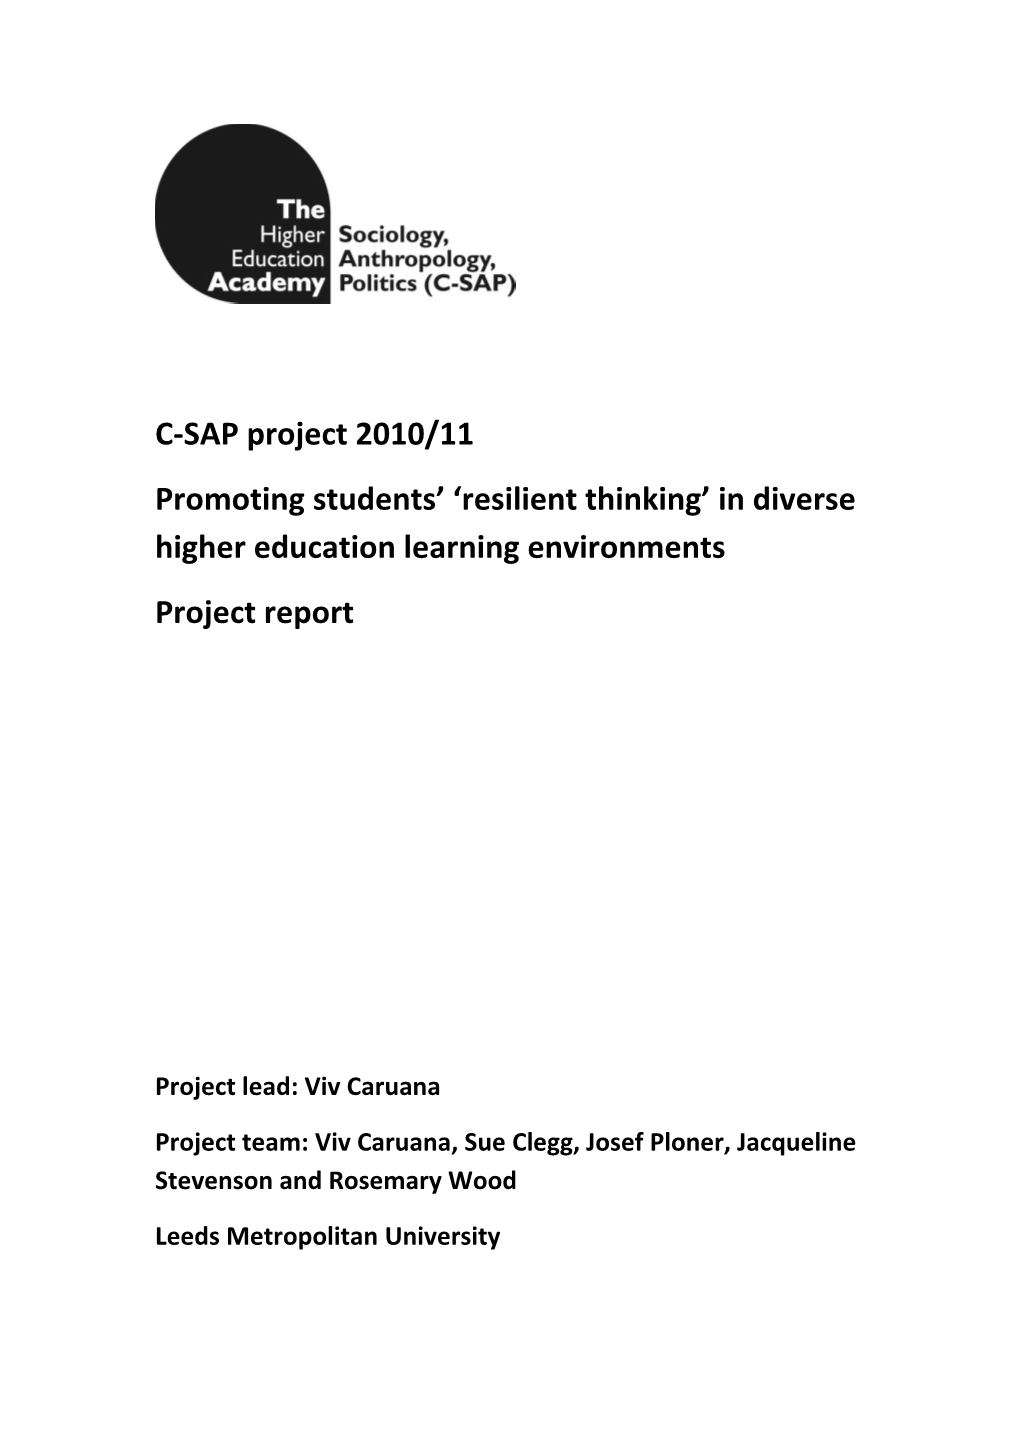 Promoting Students Resilient Thinking in Diverse Higher Education Learning Environments